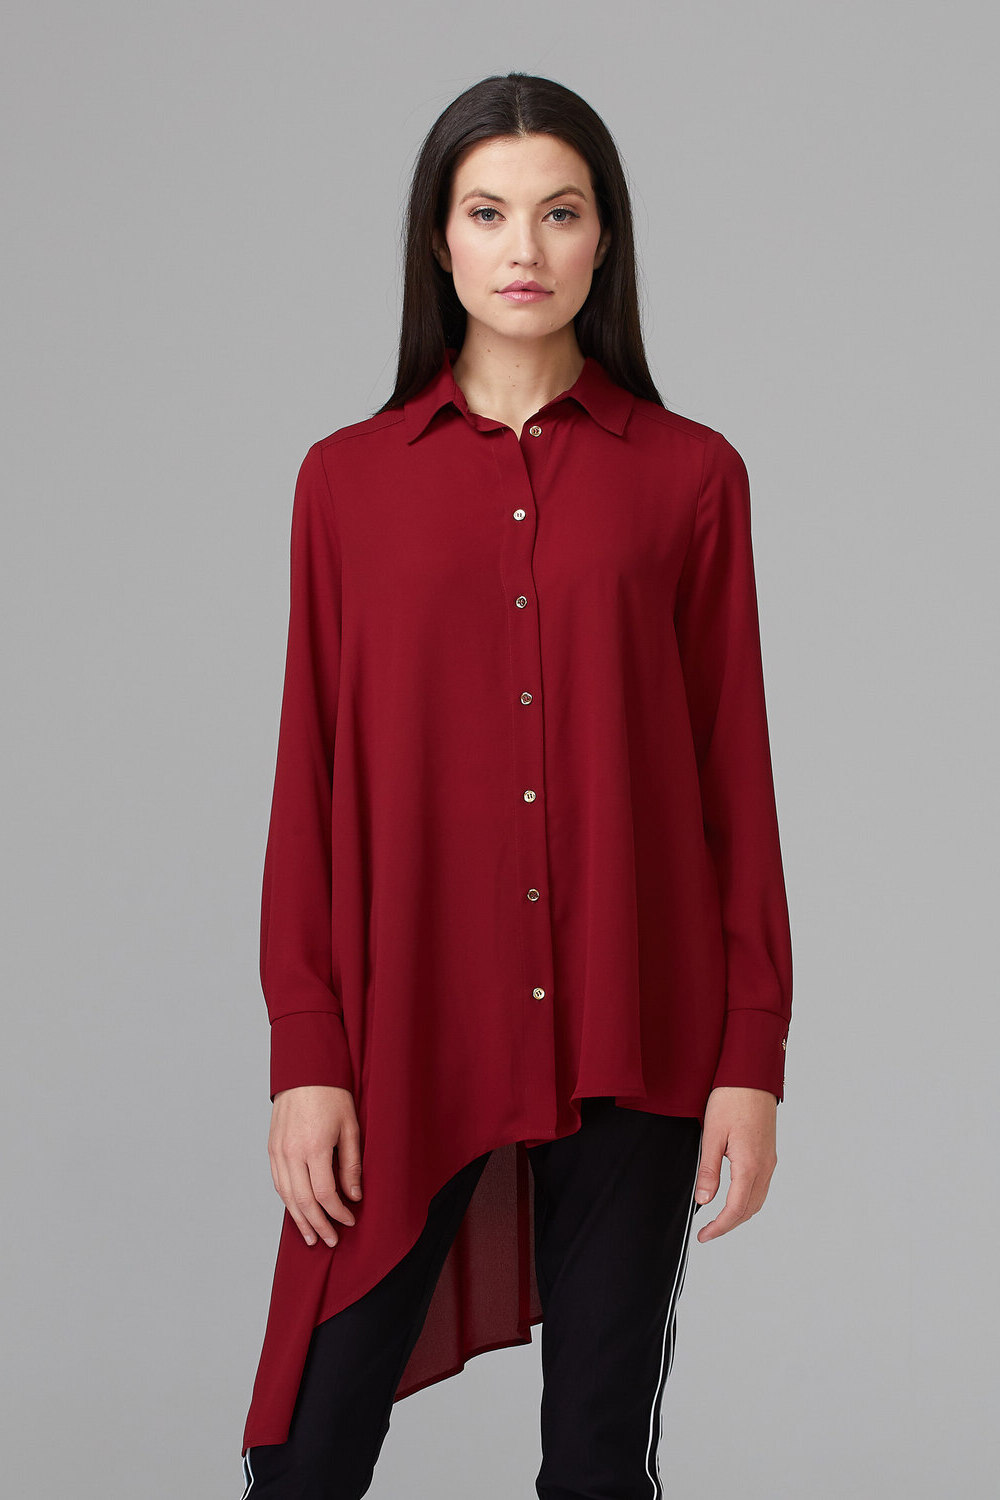 Joseph Ribkoff Shirt style 194233. Imperial Red 193